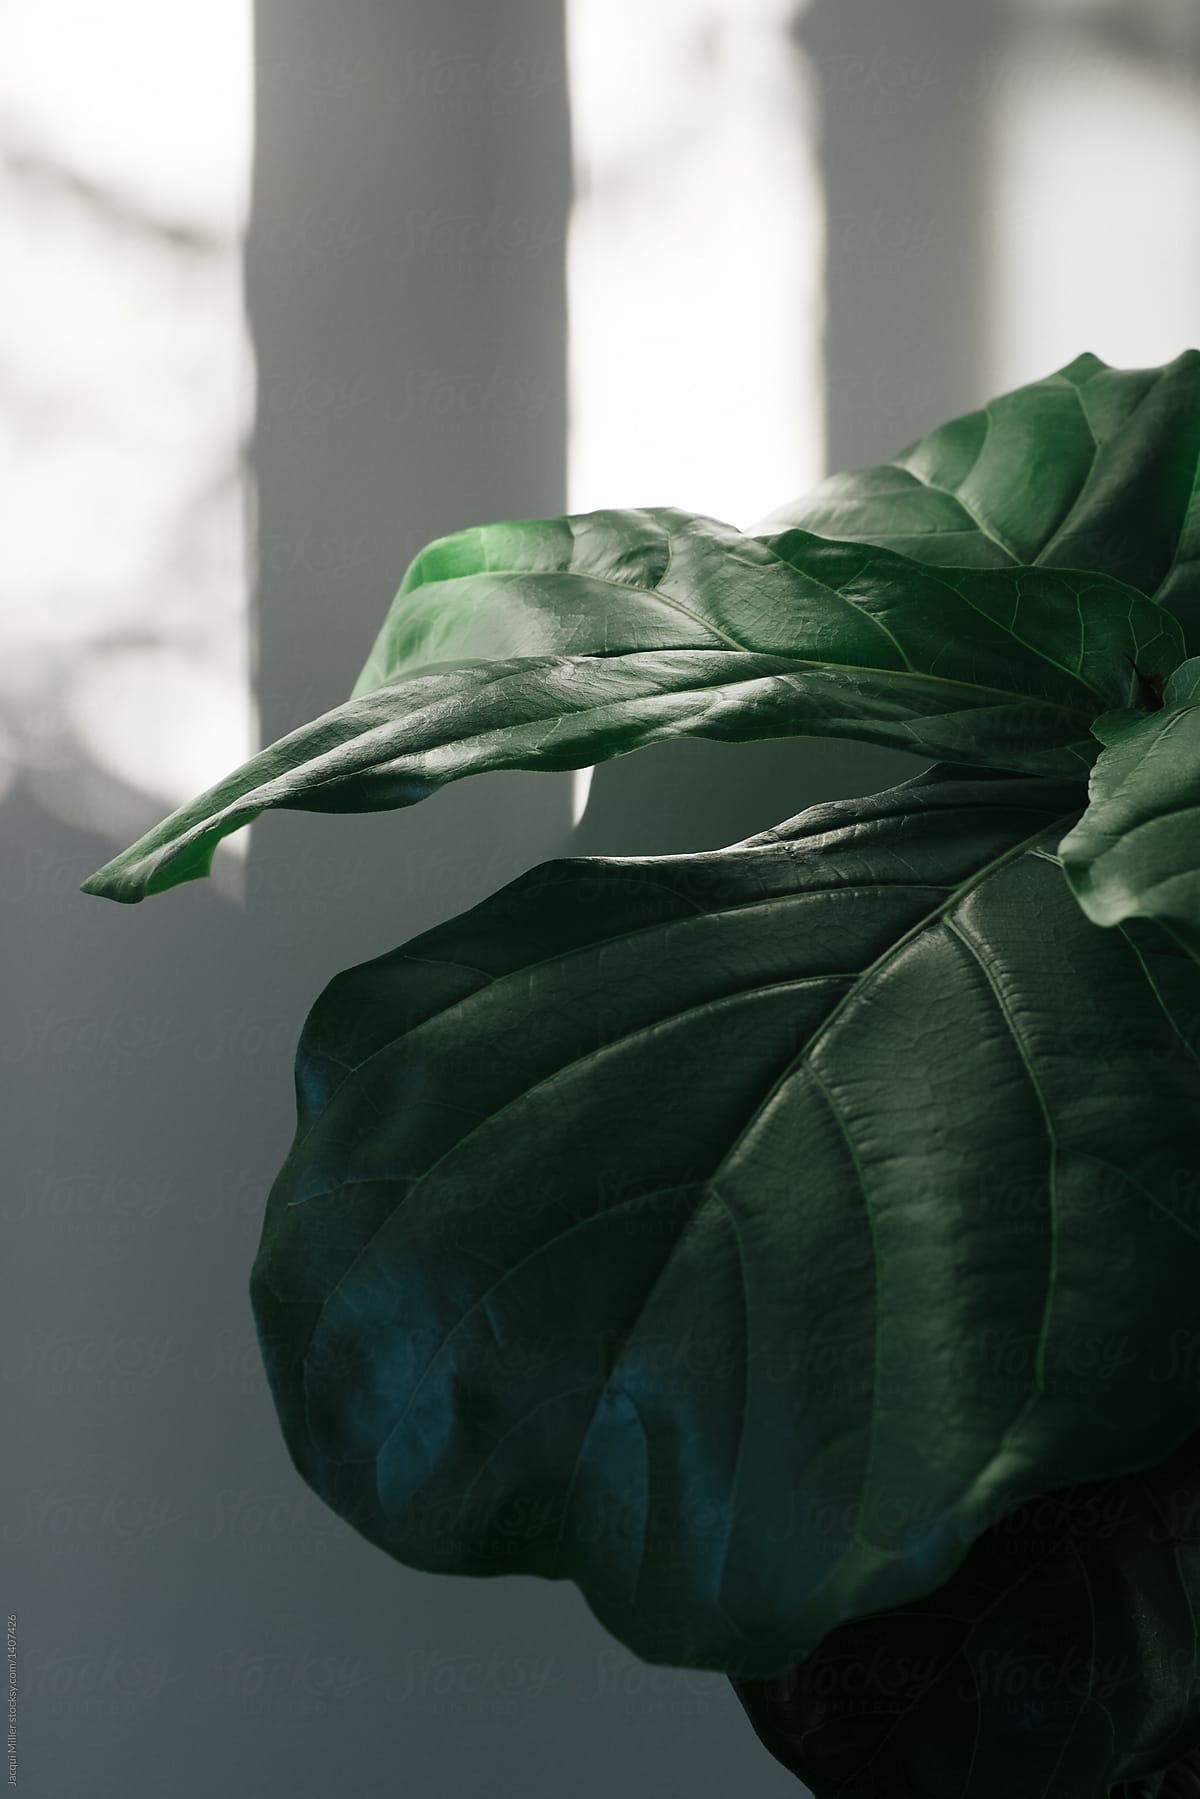 Ficus lyrata (Fiddle Leaf Fig) in late afternoon light